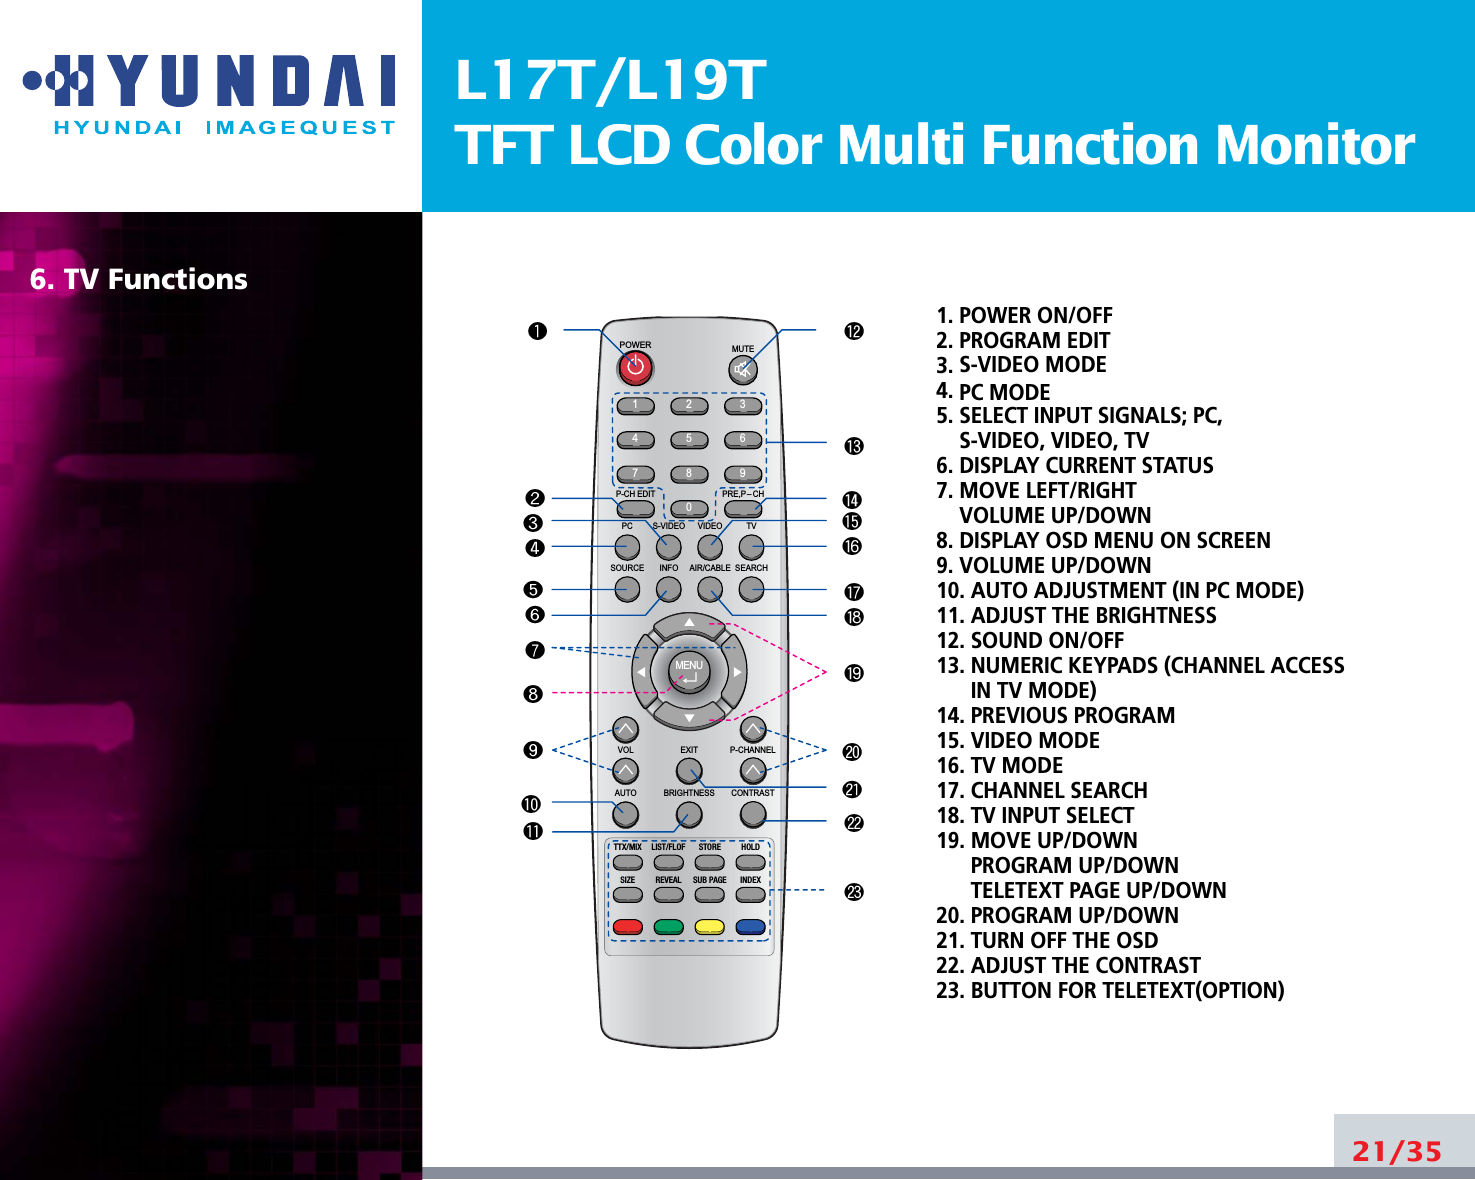 L17T/L19TTFT LCD Color Multi Function Monitor6. TV Functions21/351 203475869MUTEP-CH EDIT PRE,P – CHPC S-VIDEO VIDEO TVSOURCE INFO AIR/CABLE SEARCHVOL EXIT P-CHANNELAUTO BRIGHTNESS CONTRASTPOWERTTX/MIX LIST/FLOF STORE HOLDSIZE REVEAL SUB PAGE INDEXMENU1. POWER ON/OFF2. PROGRAM EDIT3. S-VIDEO MODE4. PC MODE5. SELECT INPUT SIGNALS; PC,S-VIDEO, VIDEO, TV6. DISPLAY CURRENT STATUS7. MOVE LEFT/RIGHTVOLUME UP/DOWN8. DISPLAY OSD MENU ON SCREEN9. VOLUME UP/DOWN10. AUTO ADJUSTMENT (IN PC MODE)11. ADJUST THE BRIGHTNESS12. SOUND ON/OFF13. NUMERIC KEYPADS (CHANNEL ACCESSIN TV MODE) 14. PREVIOUS PROGRAM15. VIDEO MODE16. TV MODE17. CHANNEL SEARCH18. TV INPUT SELECT19. MOVE UP/DOWNPROGRAM UP/DOWN TELETEXT PAGE UP/DOWN20. PROGRAM UP/DOWN21. TURN OFF THE OSD22. ADJUST THE CONTRAST23. BUTTON FOR TELETEXT(OPTION)